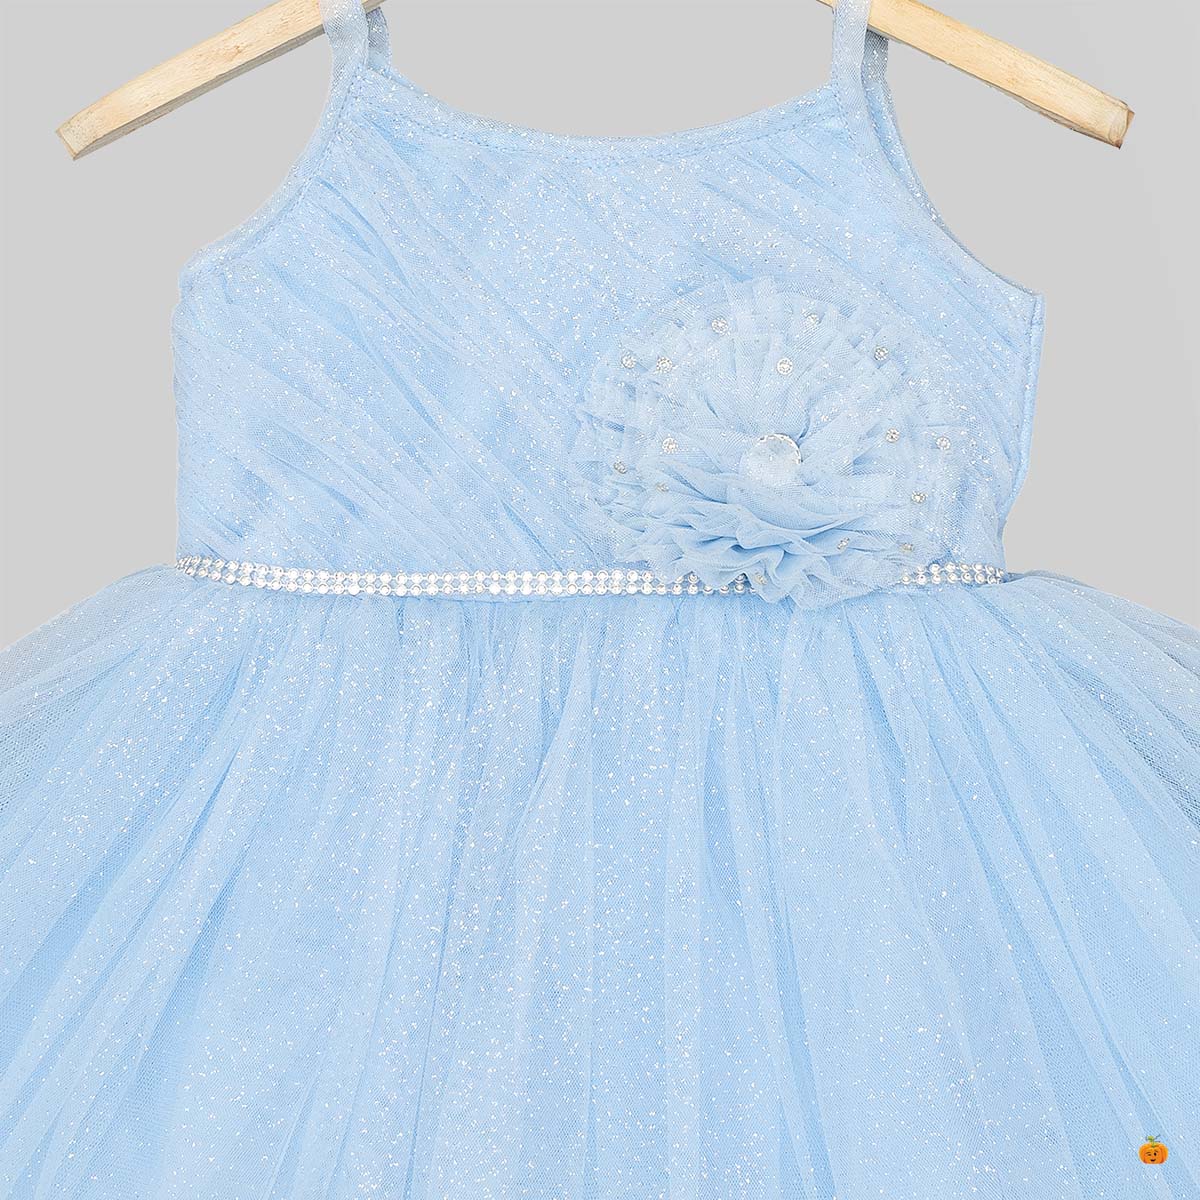 Traditional Tissue Frock for your baby girl